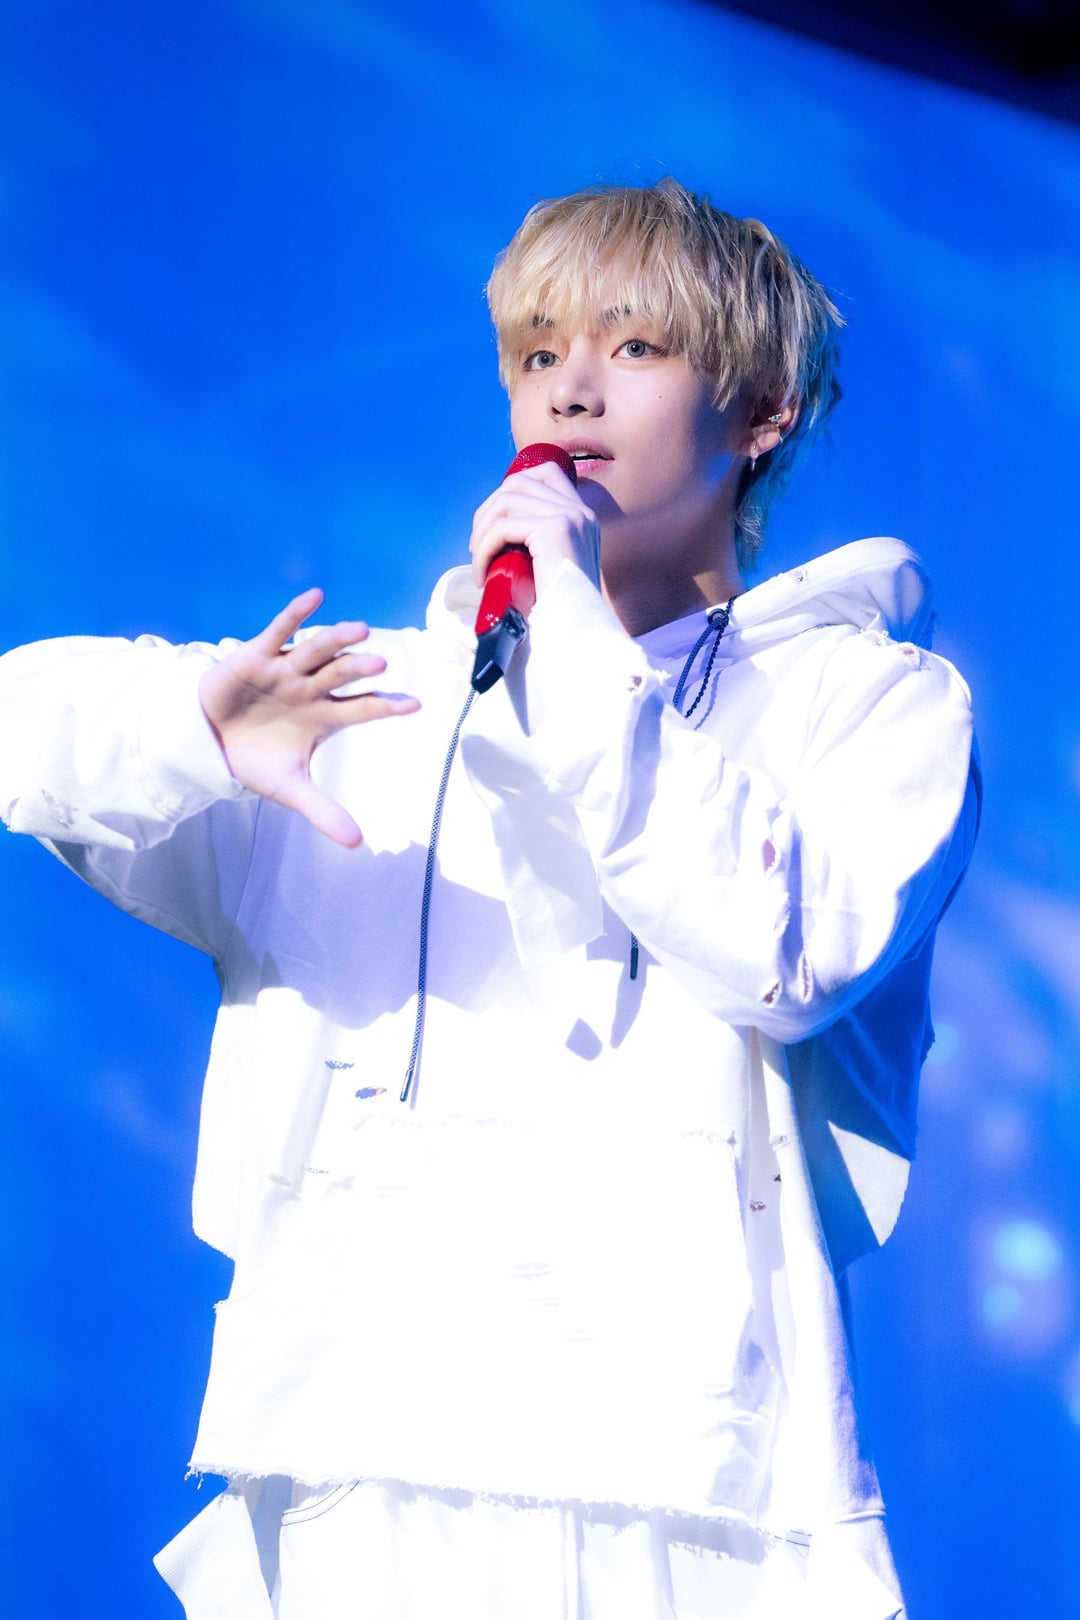 [SBS Inkigayo] More Photos of V performing “Slow Dancing” & “Rainy Days” - 110923